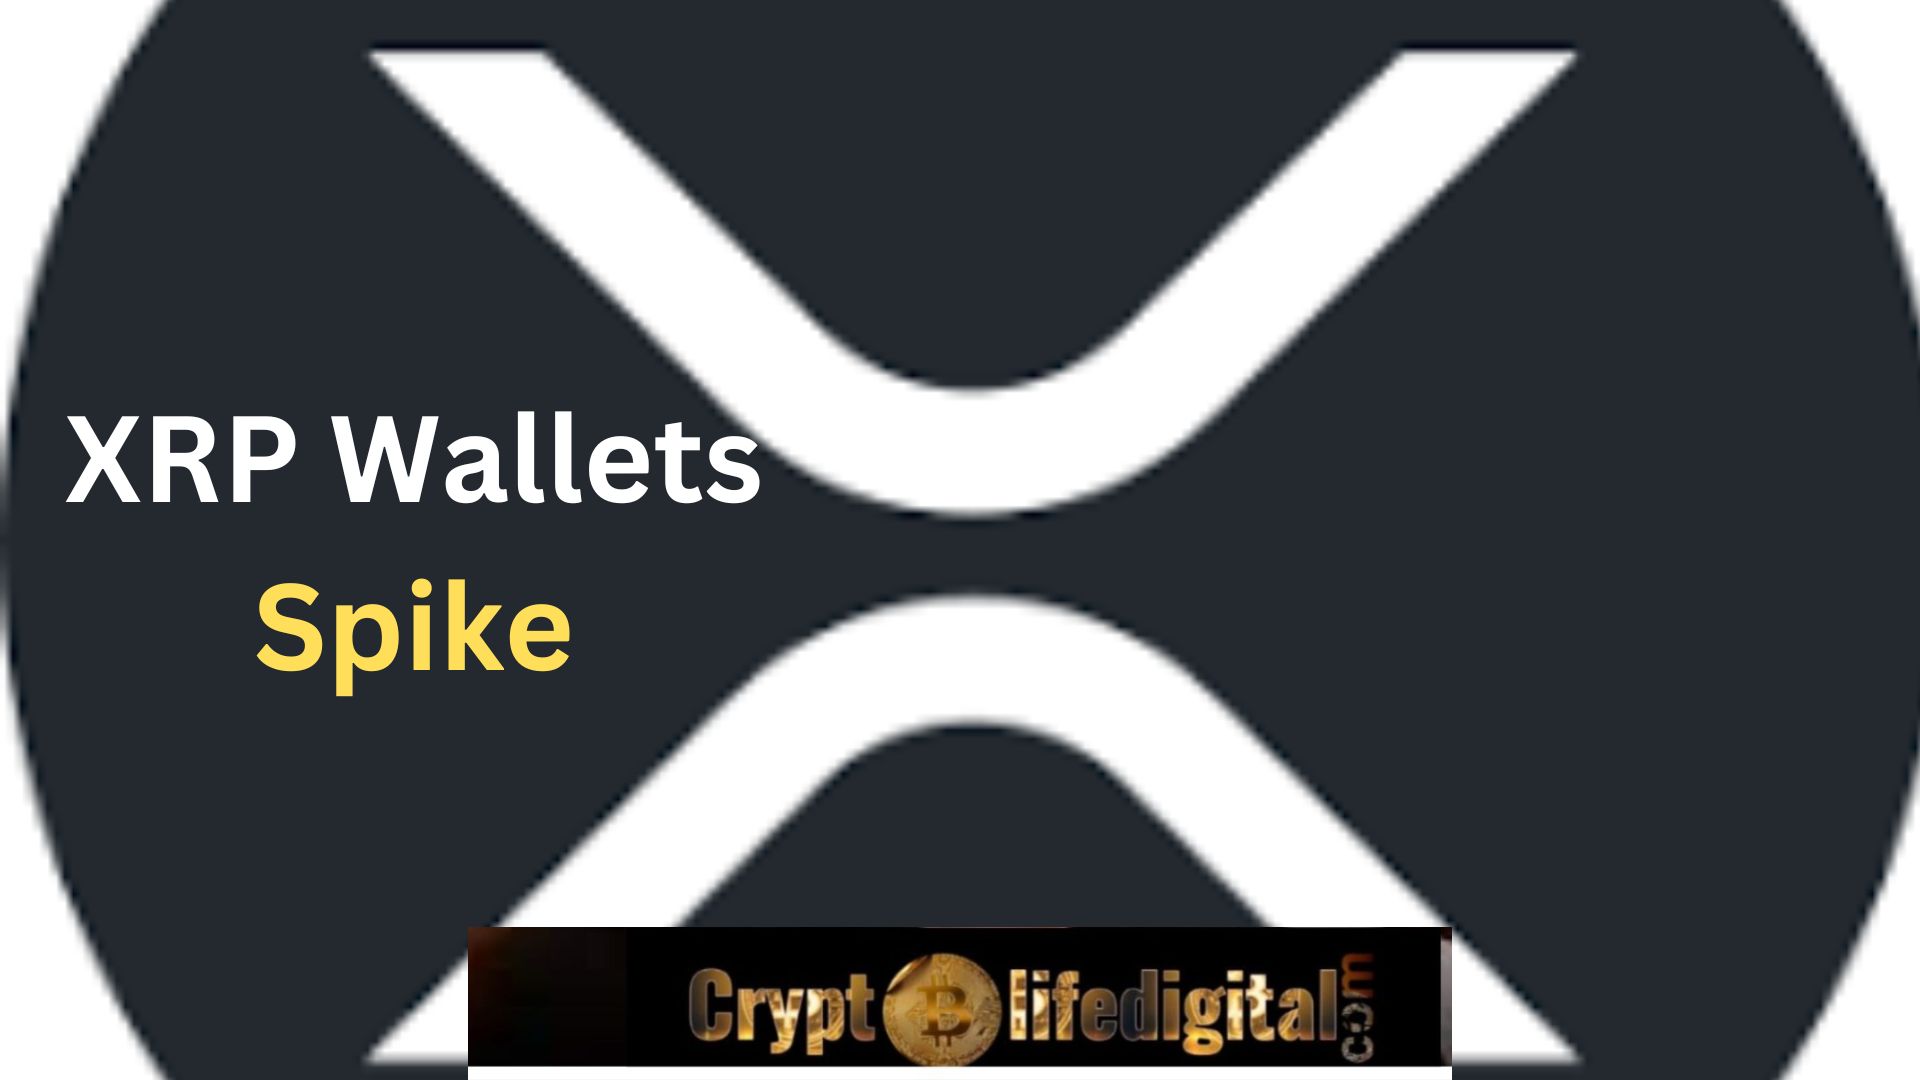 The Number Of XRP Wallets Is Now Over Four Million